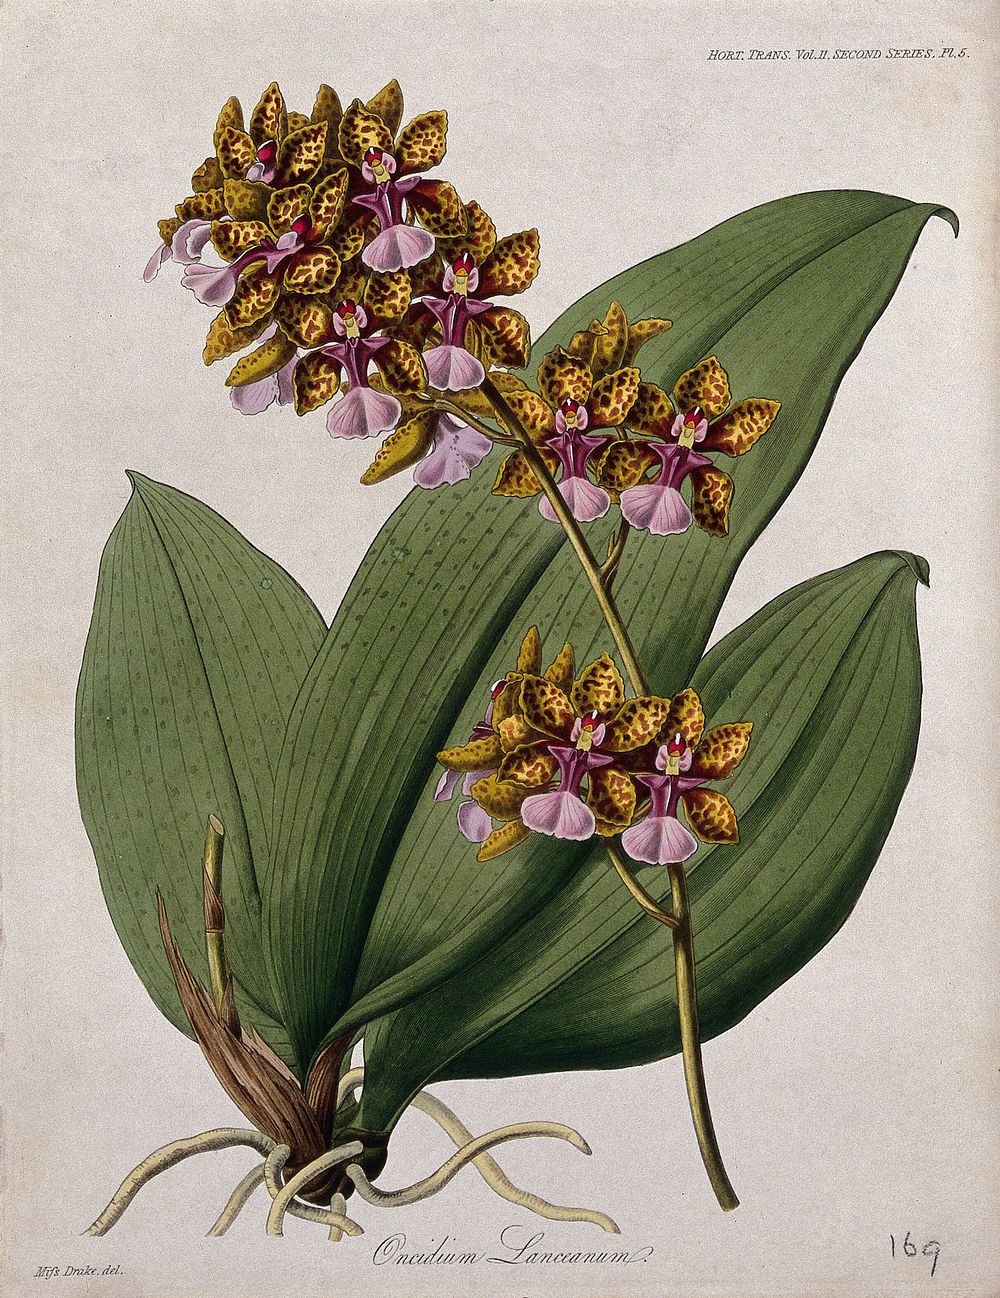 A tropical orchid (Oncidium lanceanum): flowering stem and leaves. Coloured etching, c. 1842, after Miss S. A. Drake.